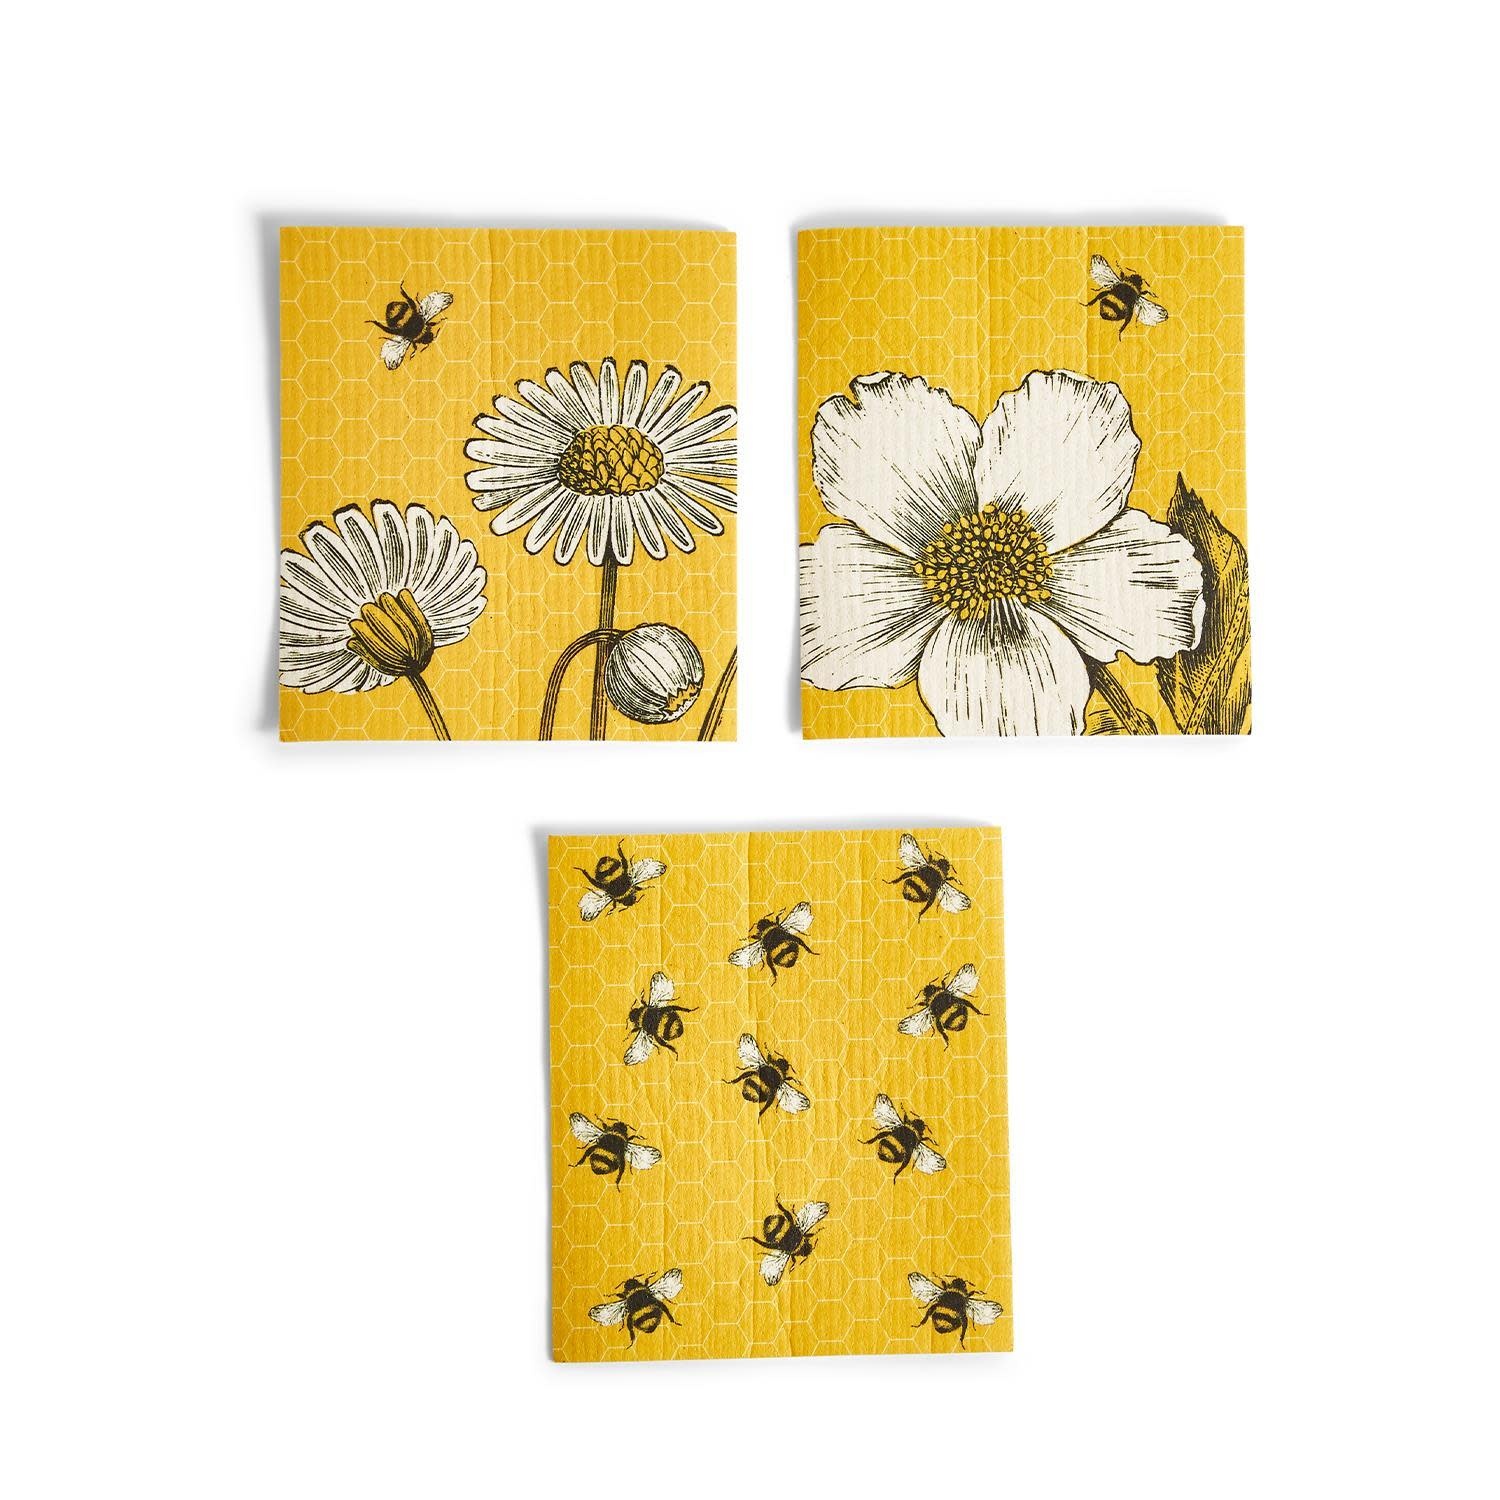 available at m. lynne designs Bees Kitchen Cloth